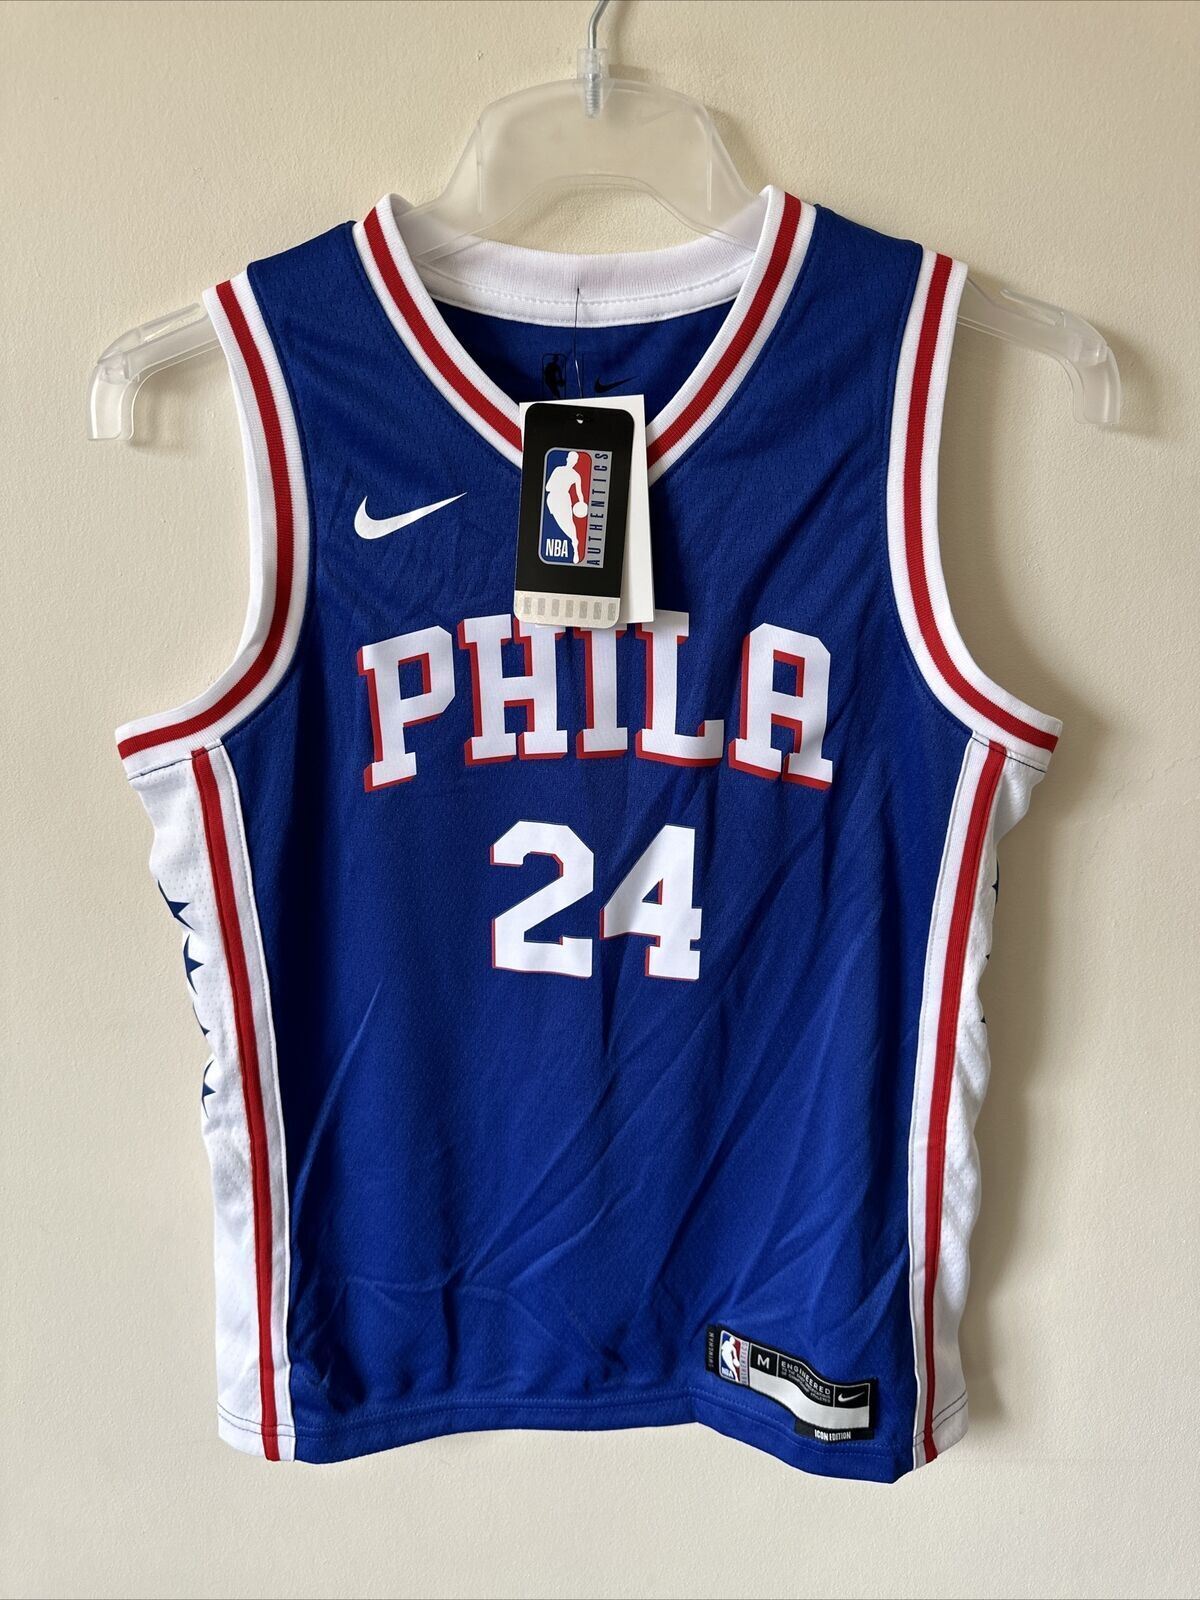 Nike NBA Philadelphia 76ers Icon Edition Jersey PAUL ANDRE 23 Youth 10-12  Years